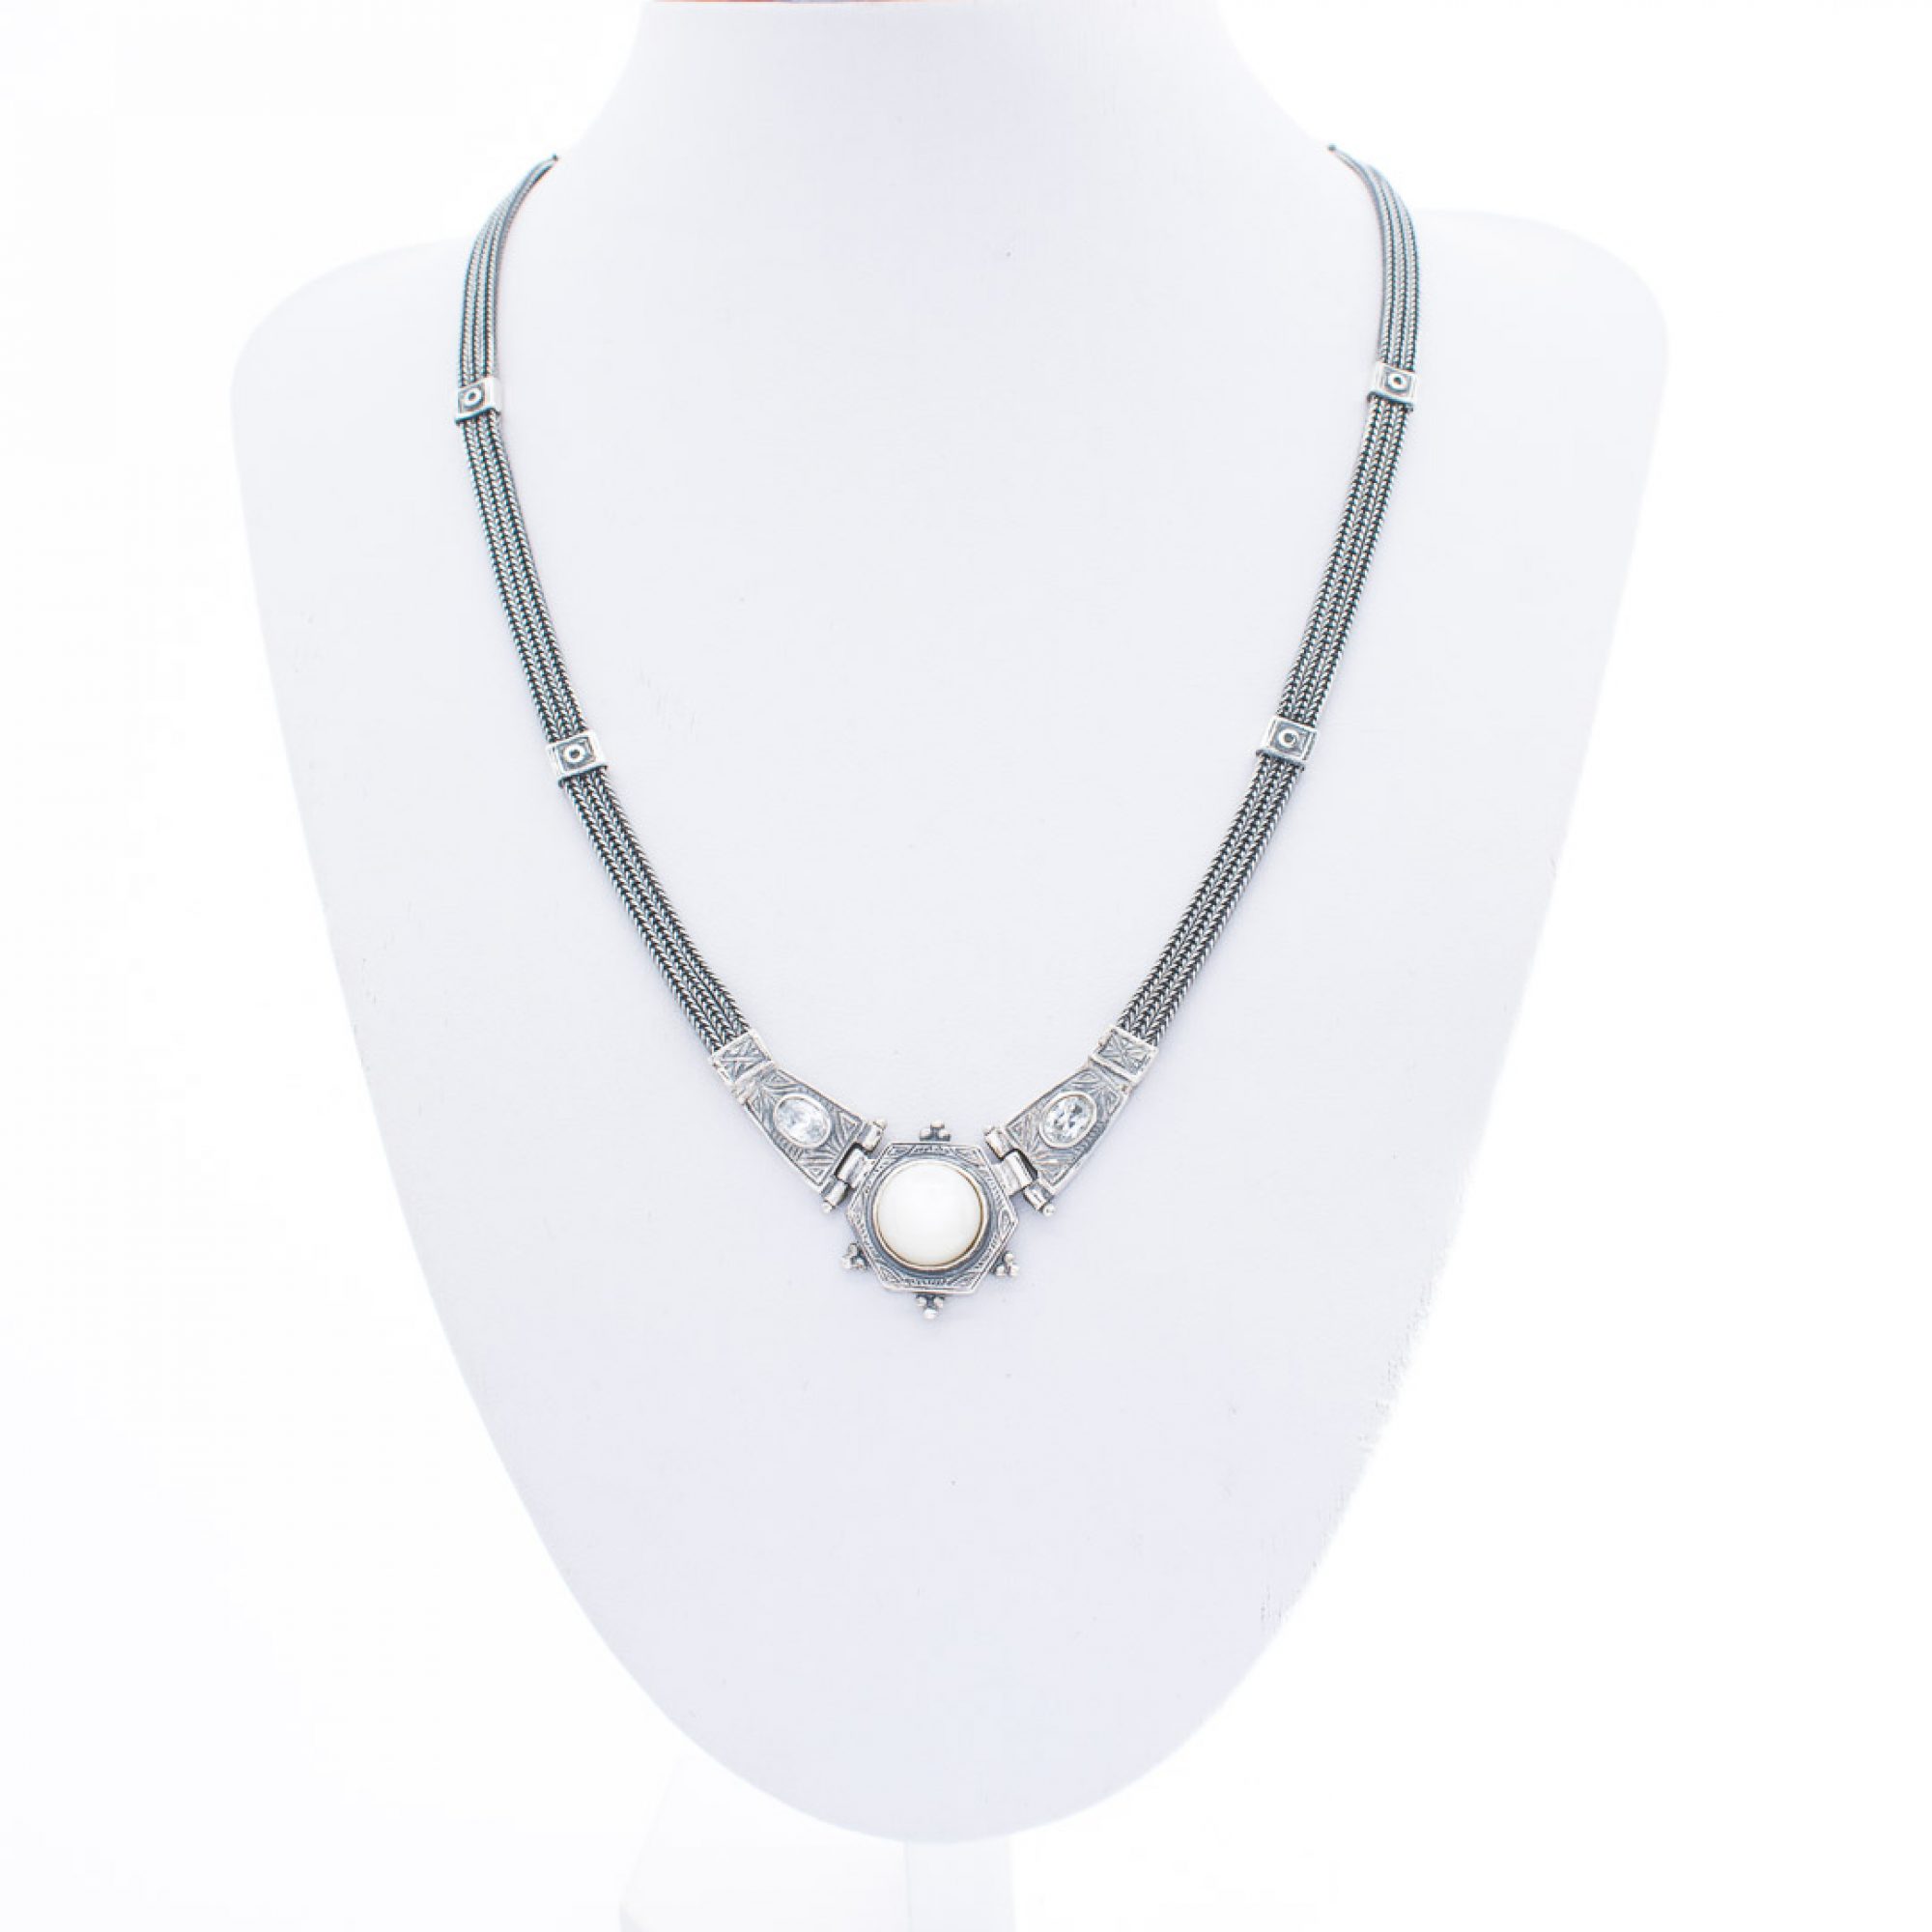 Oxidised necklace with mother of pearl and zircon stones